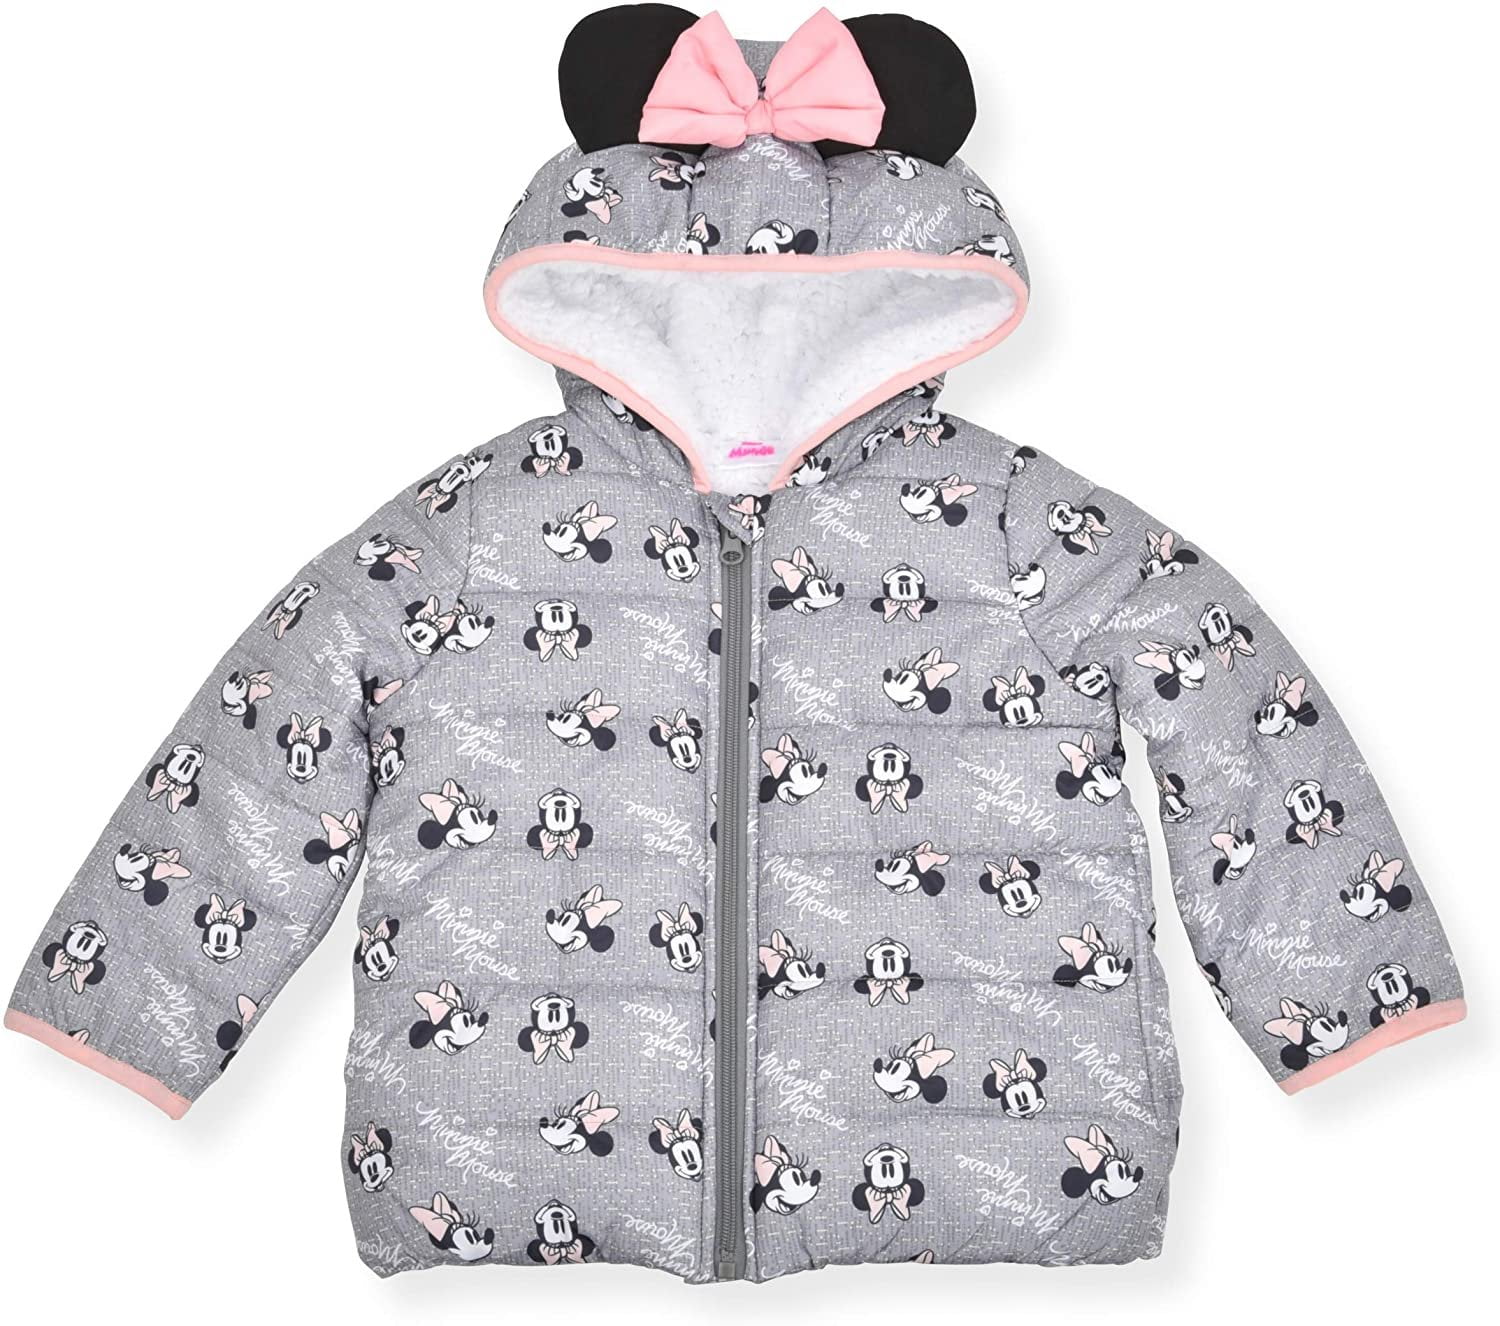 Girls Minnie Mouse Jacket With Bow On Hood Size 6 